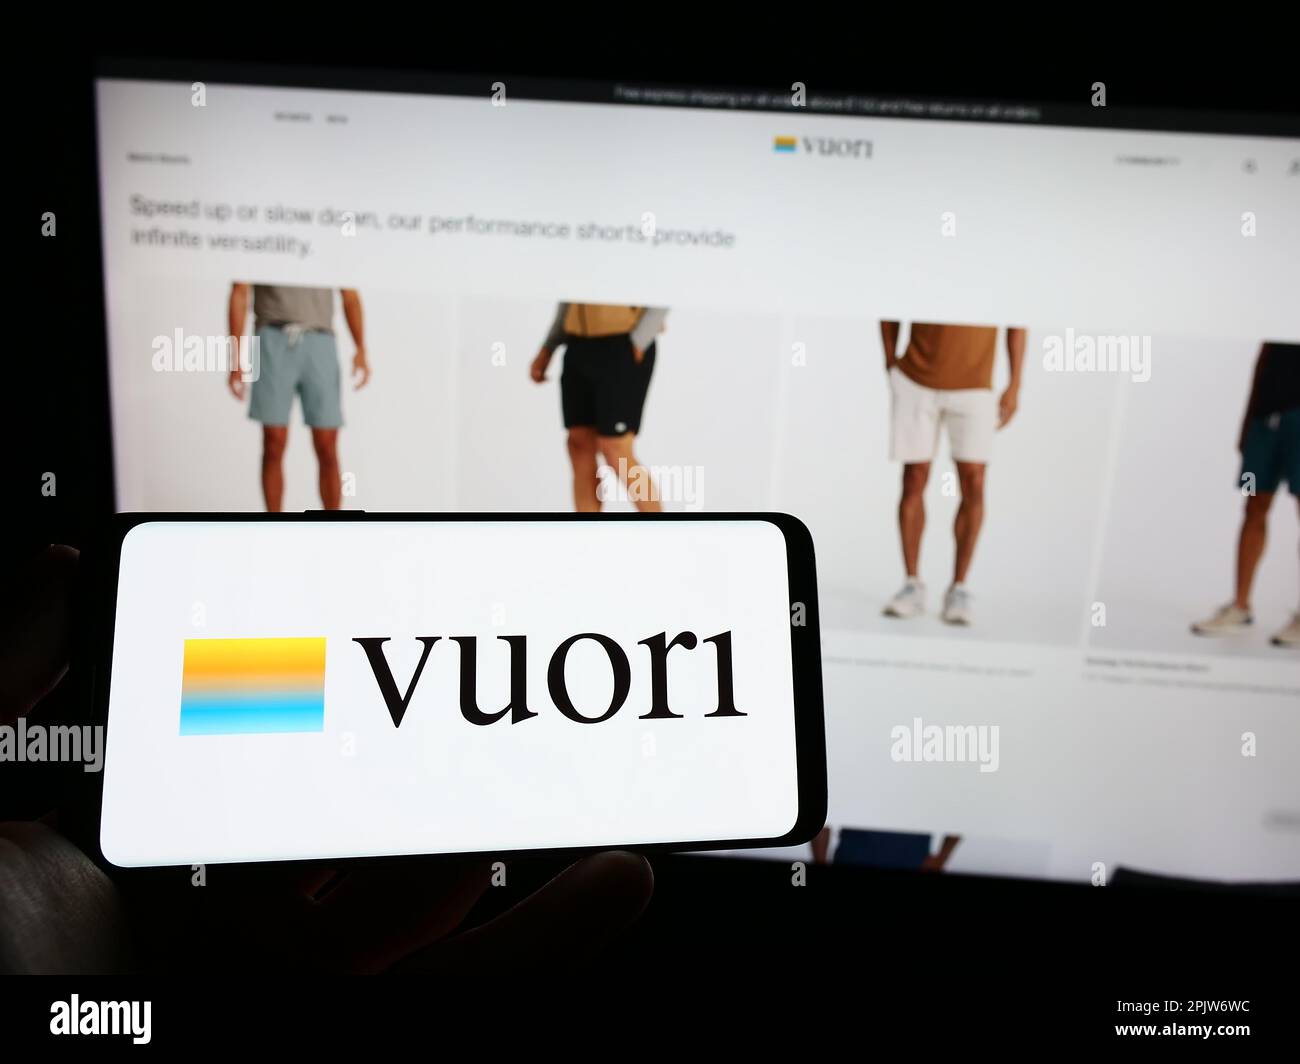 Person holding mobile phone with logo of American apparel e-commerce company Vuori Inc. on screen in front of web page. Focus on phone display. Stock Photo